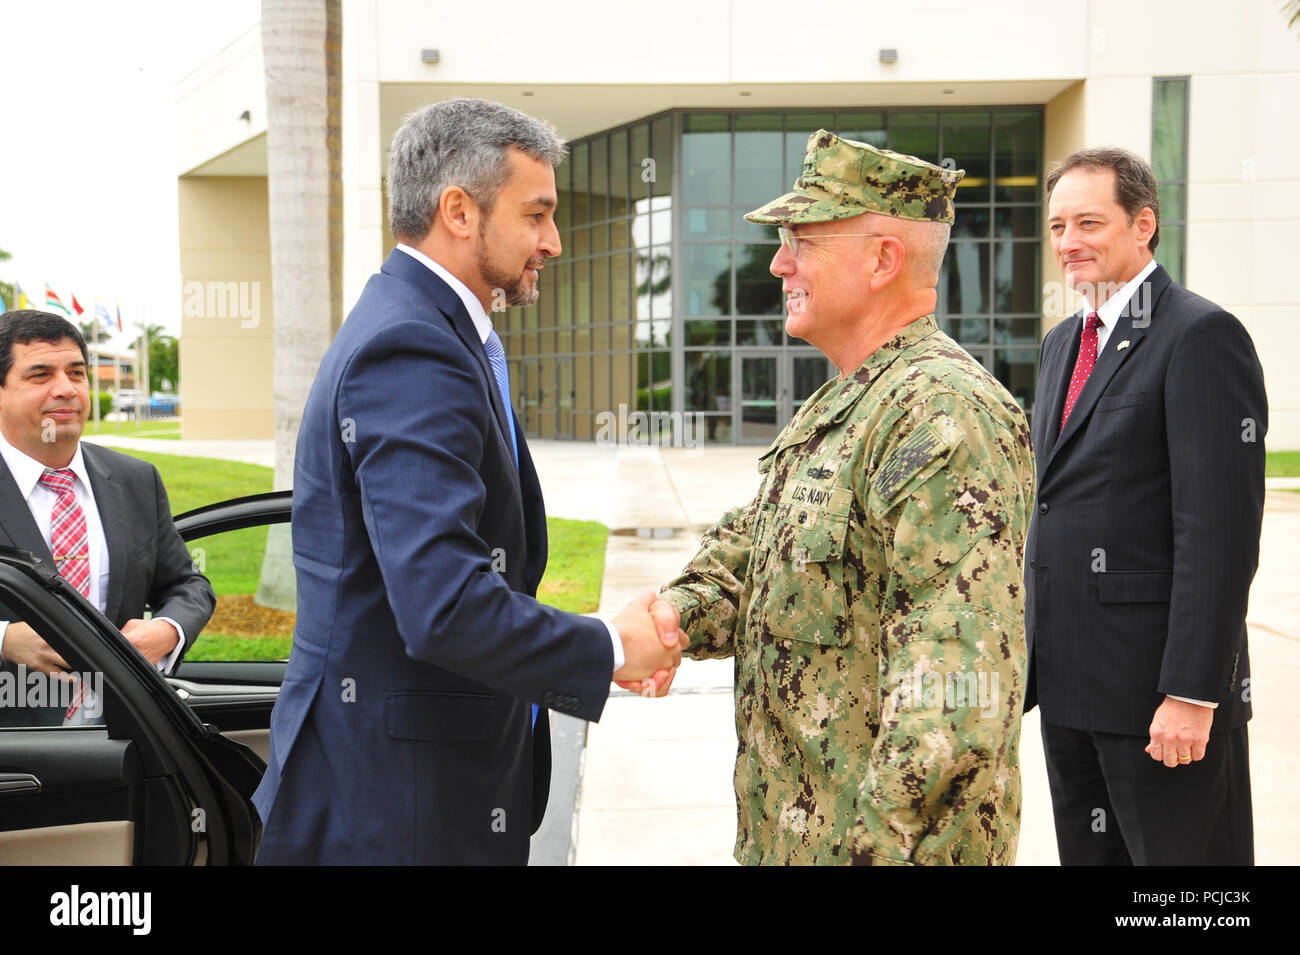 U.S. Navy Adm. Kurt Tidd, commander of U.S. Southern Command, greets Paraguay President-elect Mario Abdo Benitez upon his arrival at the command’s headquarters in Miami July 30. Abdo Benítez met with Tidd and other senior leaders to discuss the U.S.-Paraguay defense partnership. The close collaborative ties between the United States and Paraguay include many decades of strong security cooperation based on common interests, shared goals and mutual respect. (U.S. Southern Command photo by Juan Chiari) Stock Photo